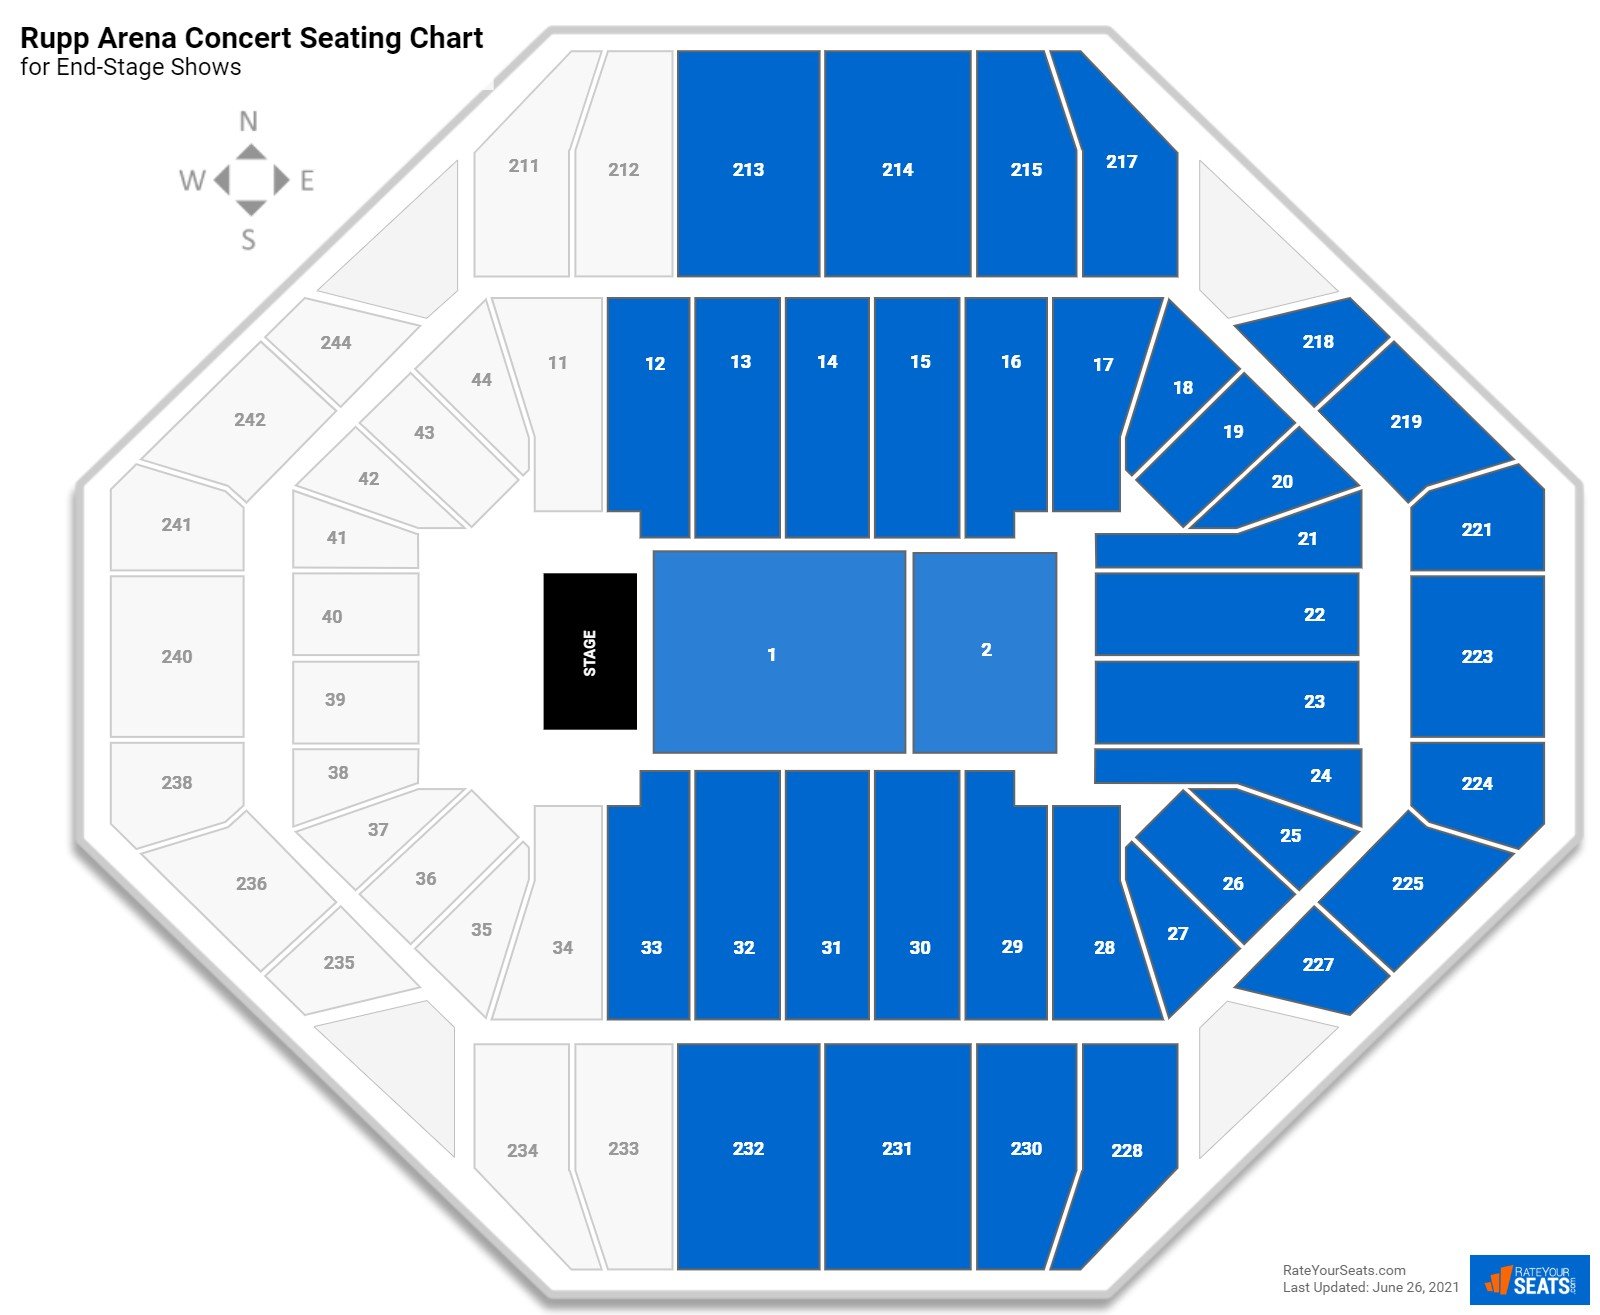 Rupp Arena Concert Seating Chart